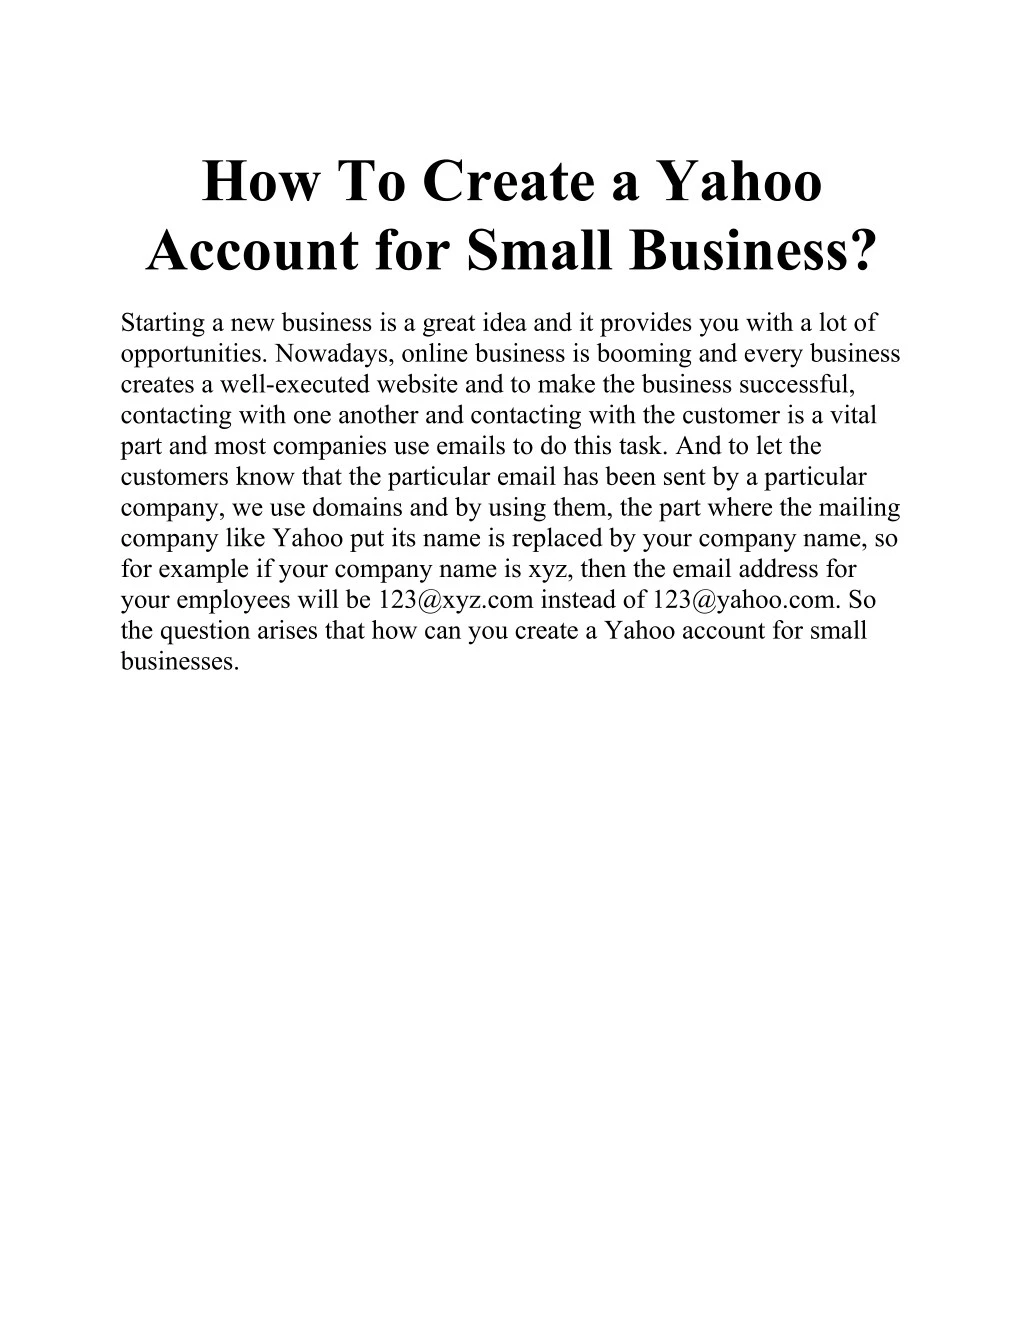 how to create a yahoo account for small business